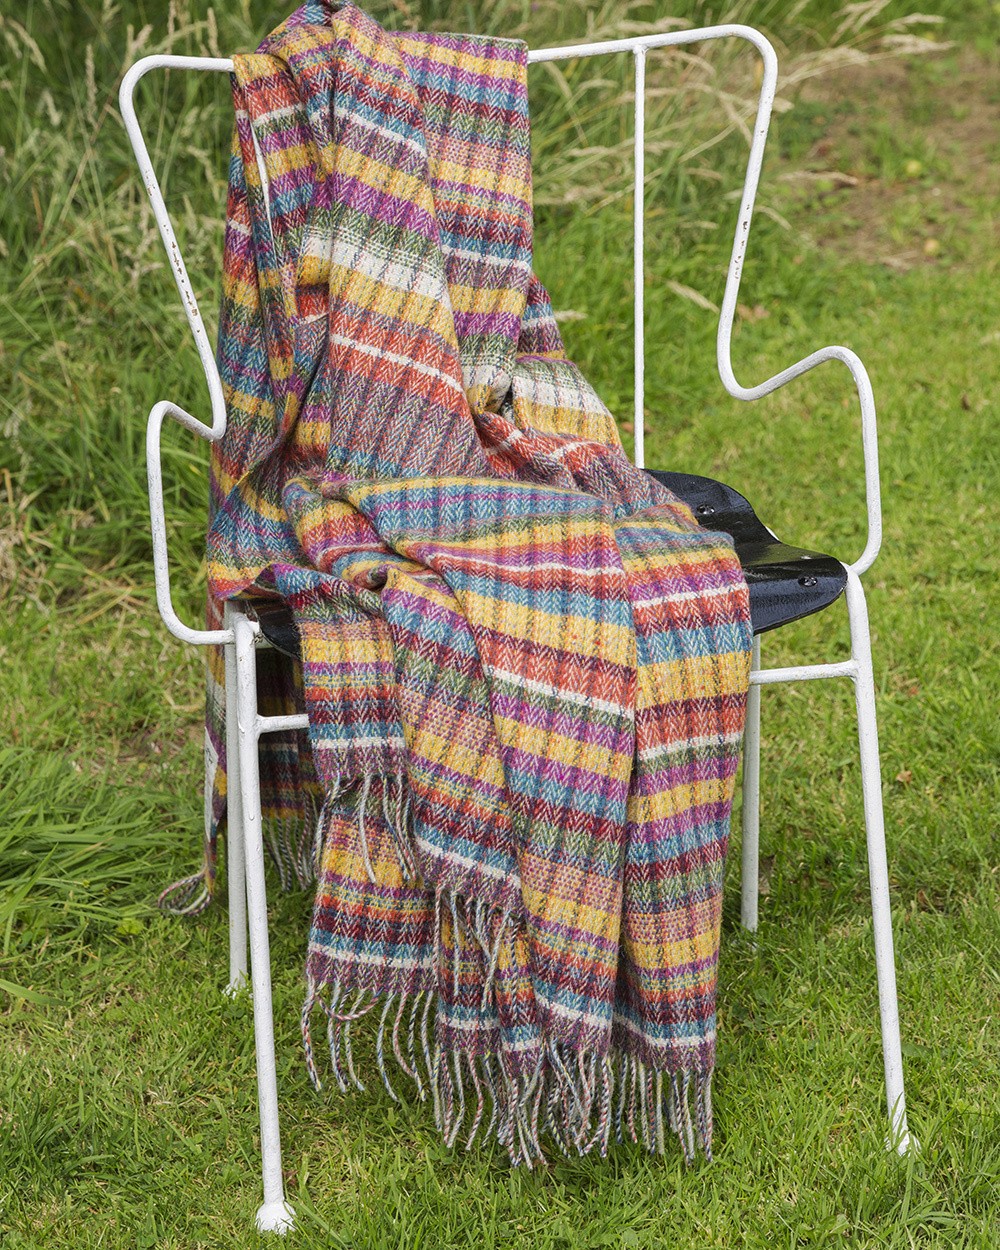 Century Donegal Throw - Donegal & Artisan Throws | Avoca